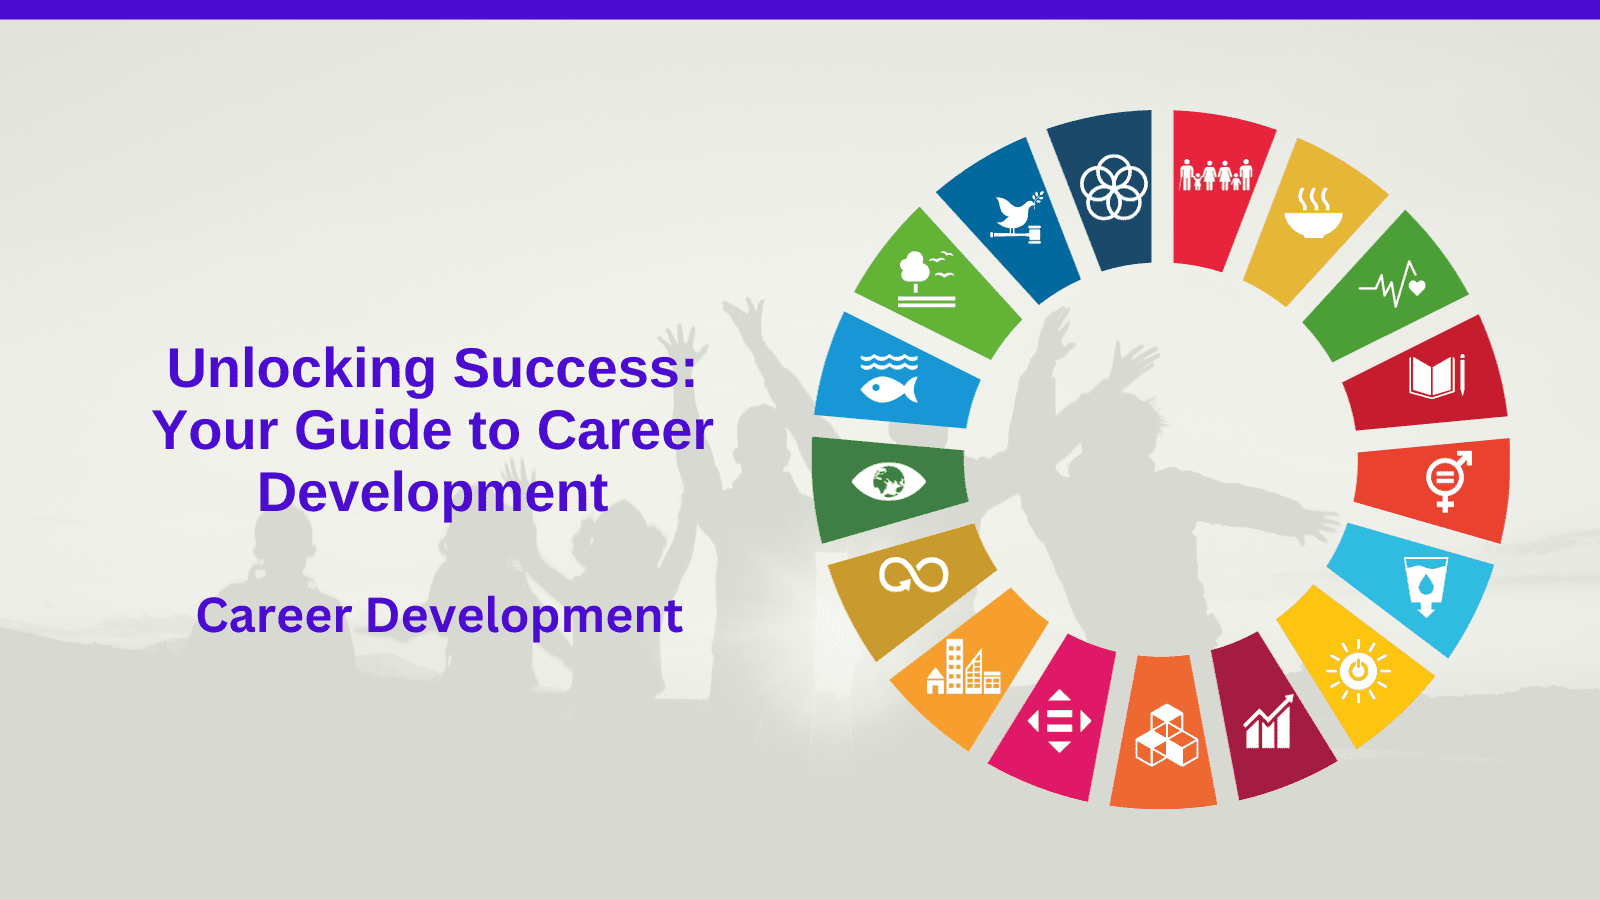 Unlocking Success: Your Guide to Career Development